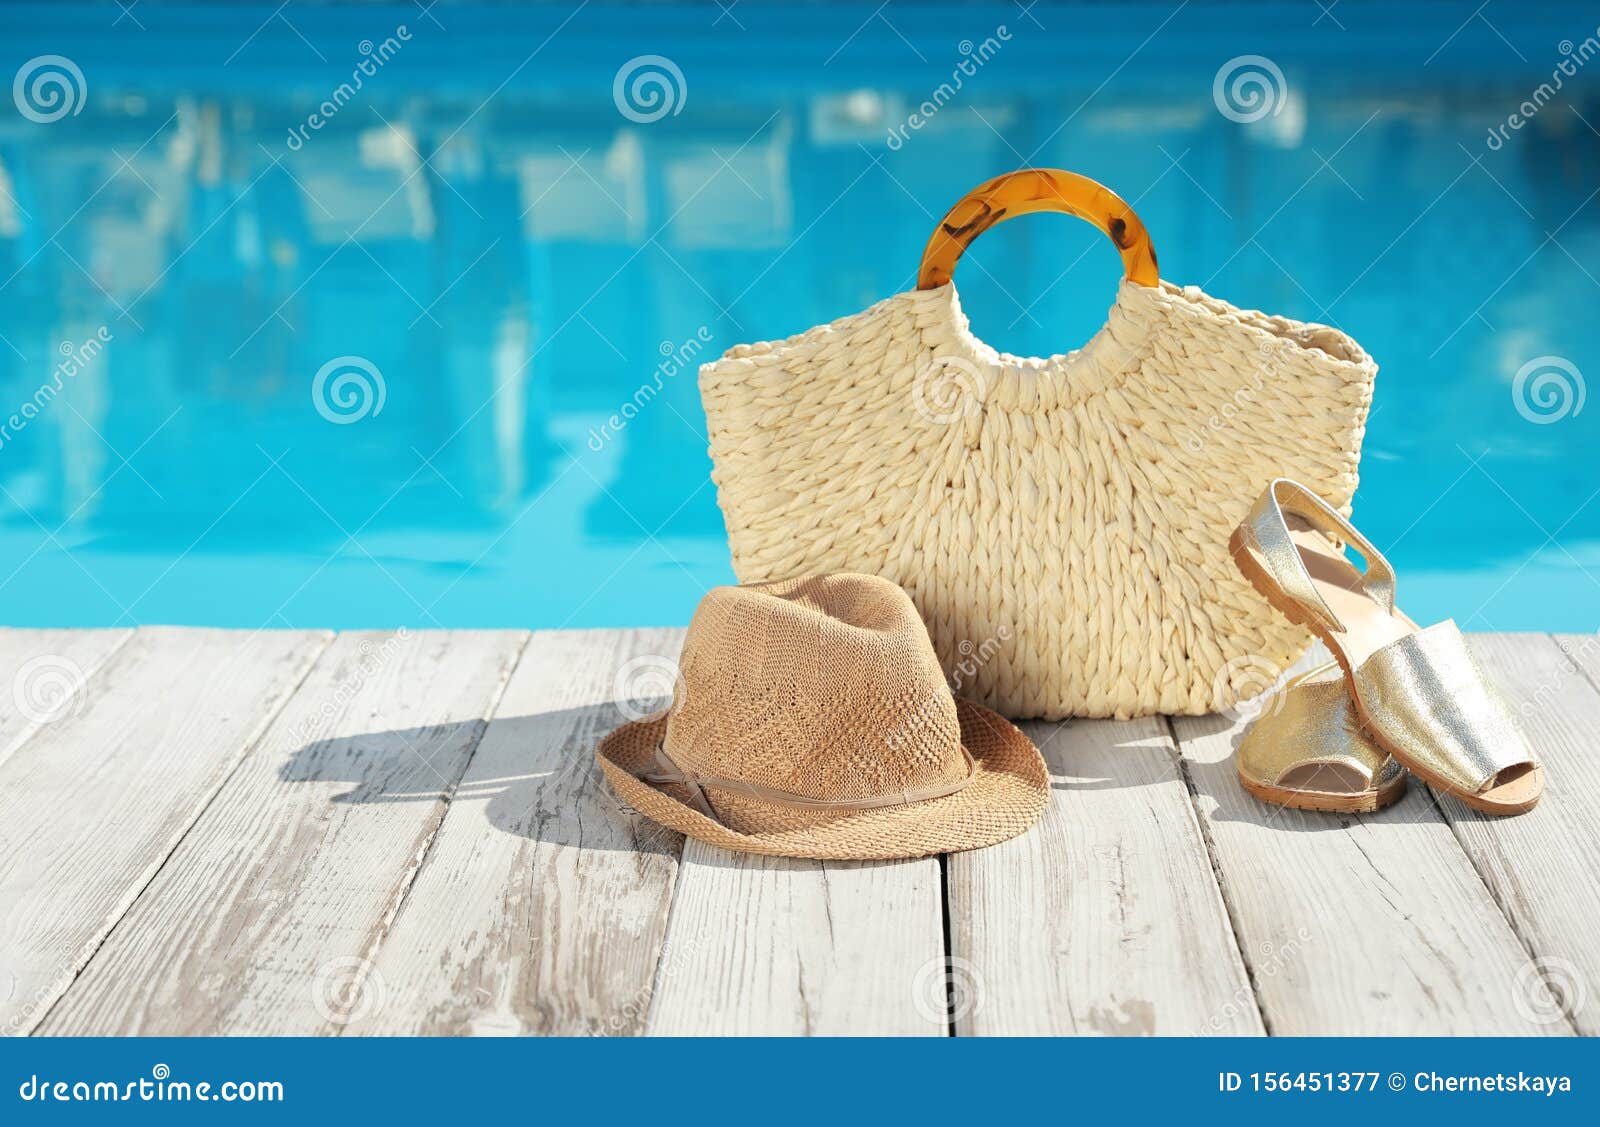 Beach Accessories On Wooden Near Outdoor Swimming Pool ...